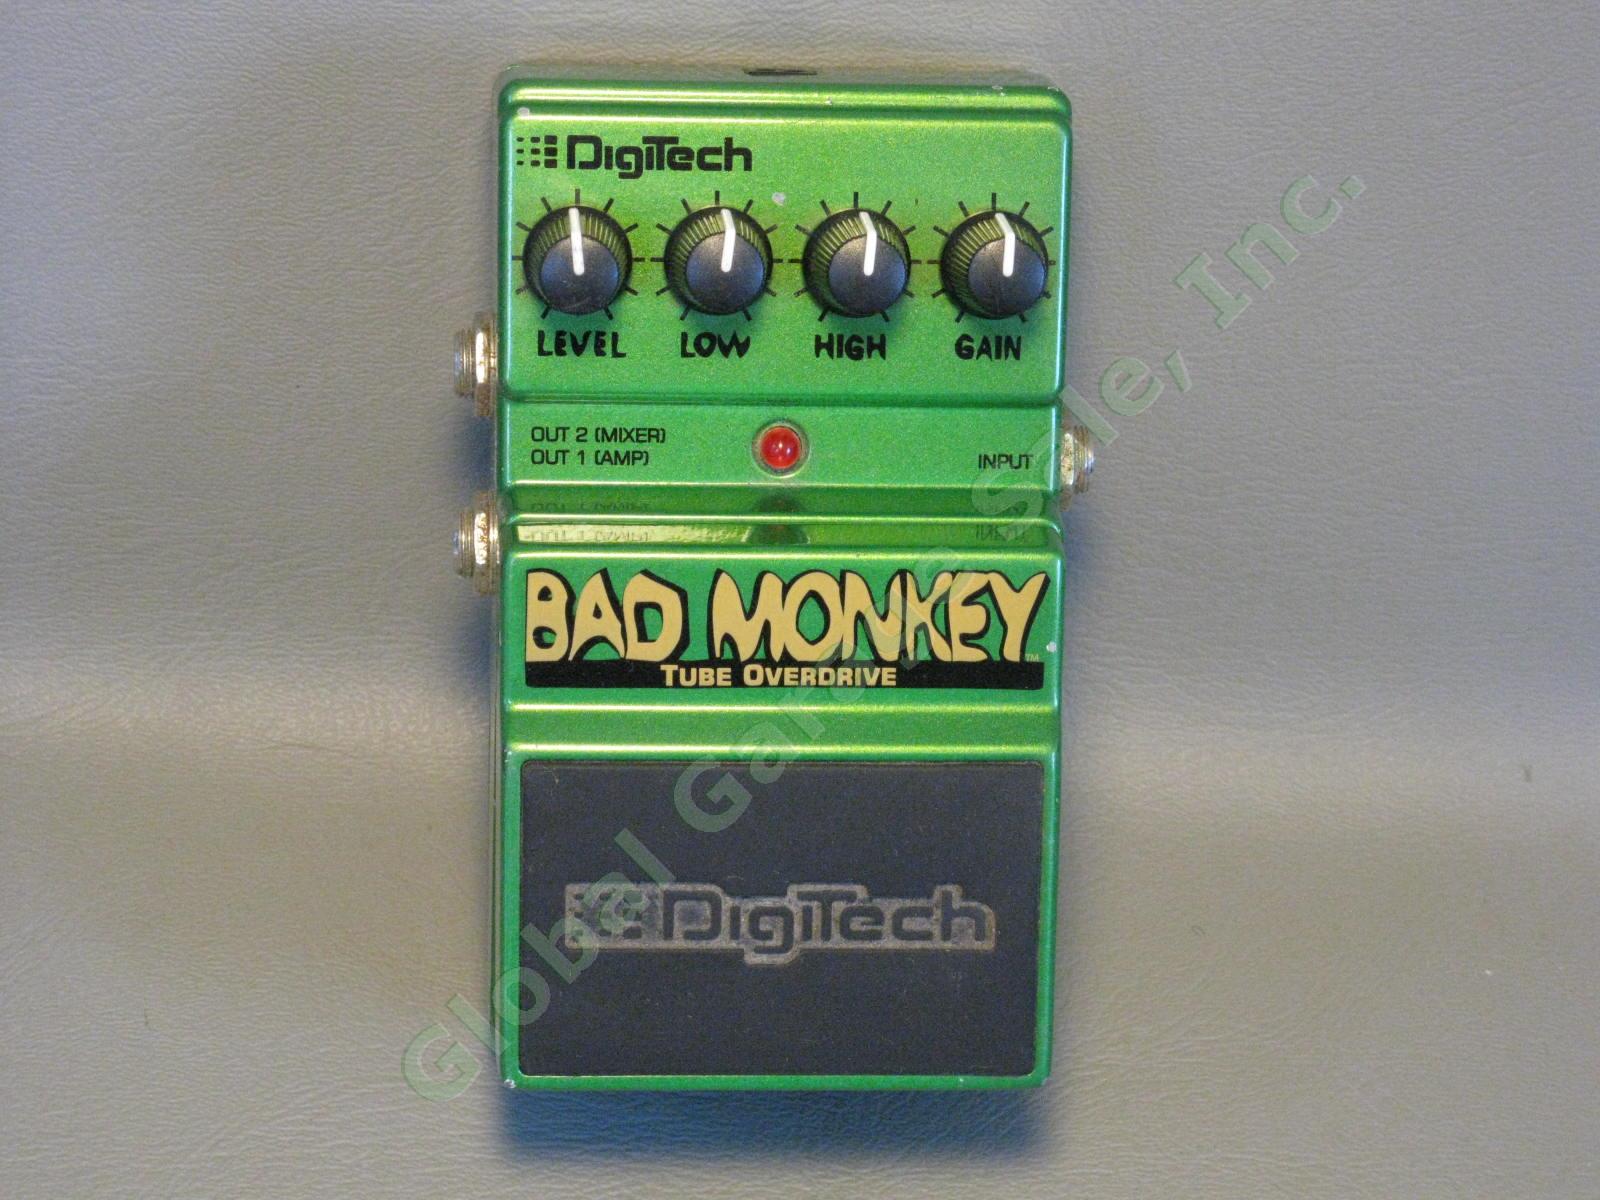 DigiTech Bad Monkey Tube Overdrive Distortion Guitar Effects Pedal Exc Cond! 1